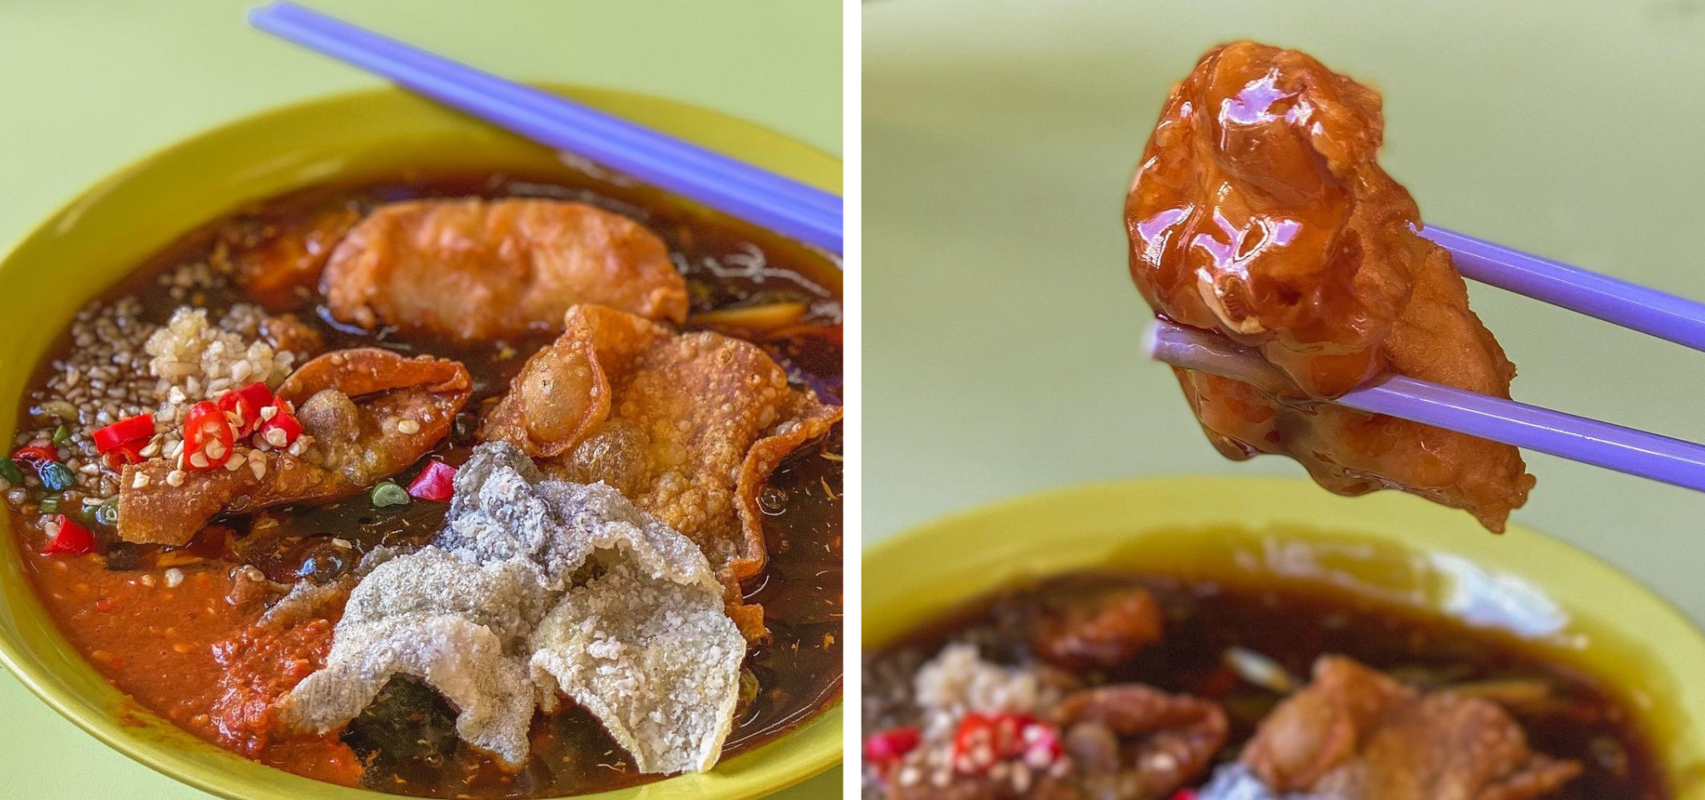 hawker dishes in singapore - whampoa lore mee meat